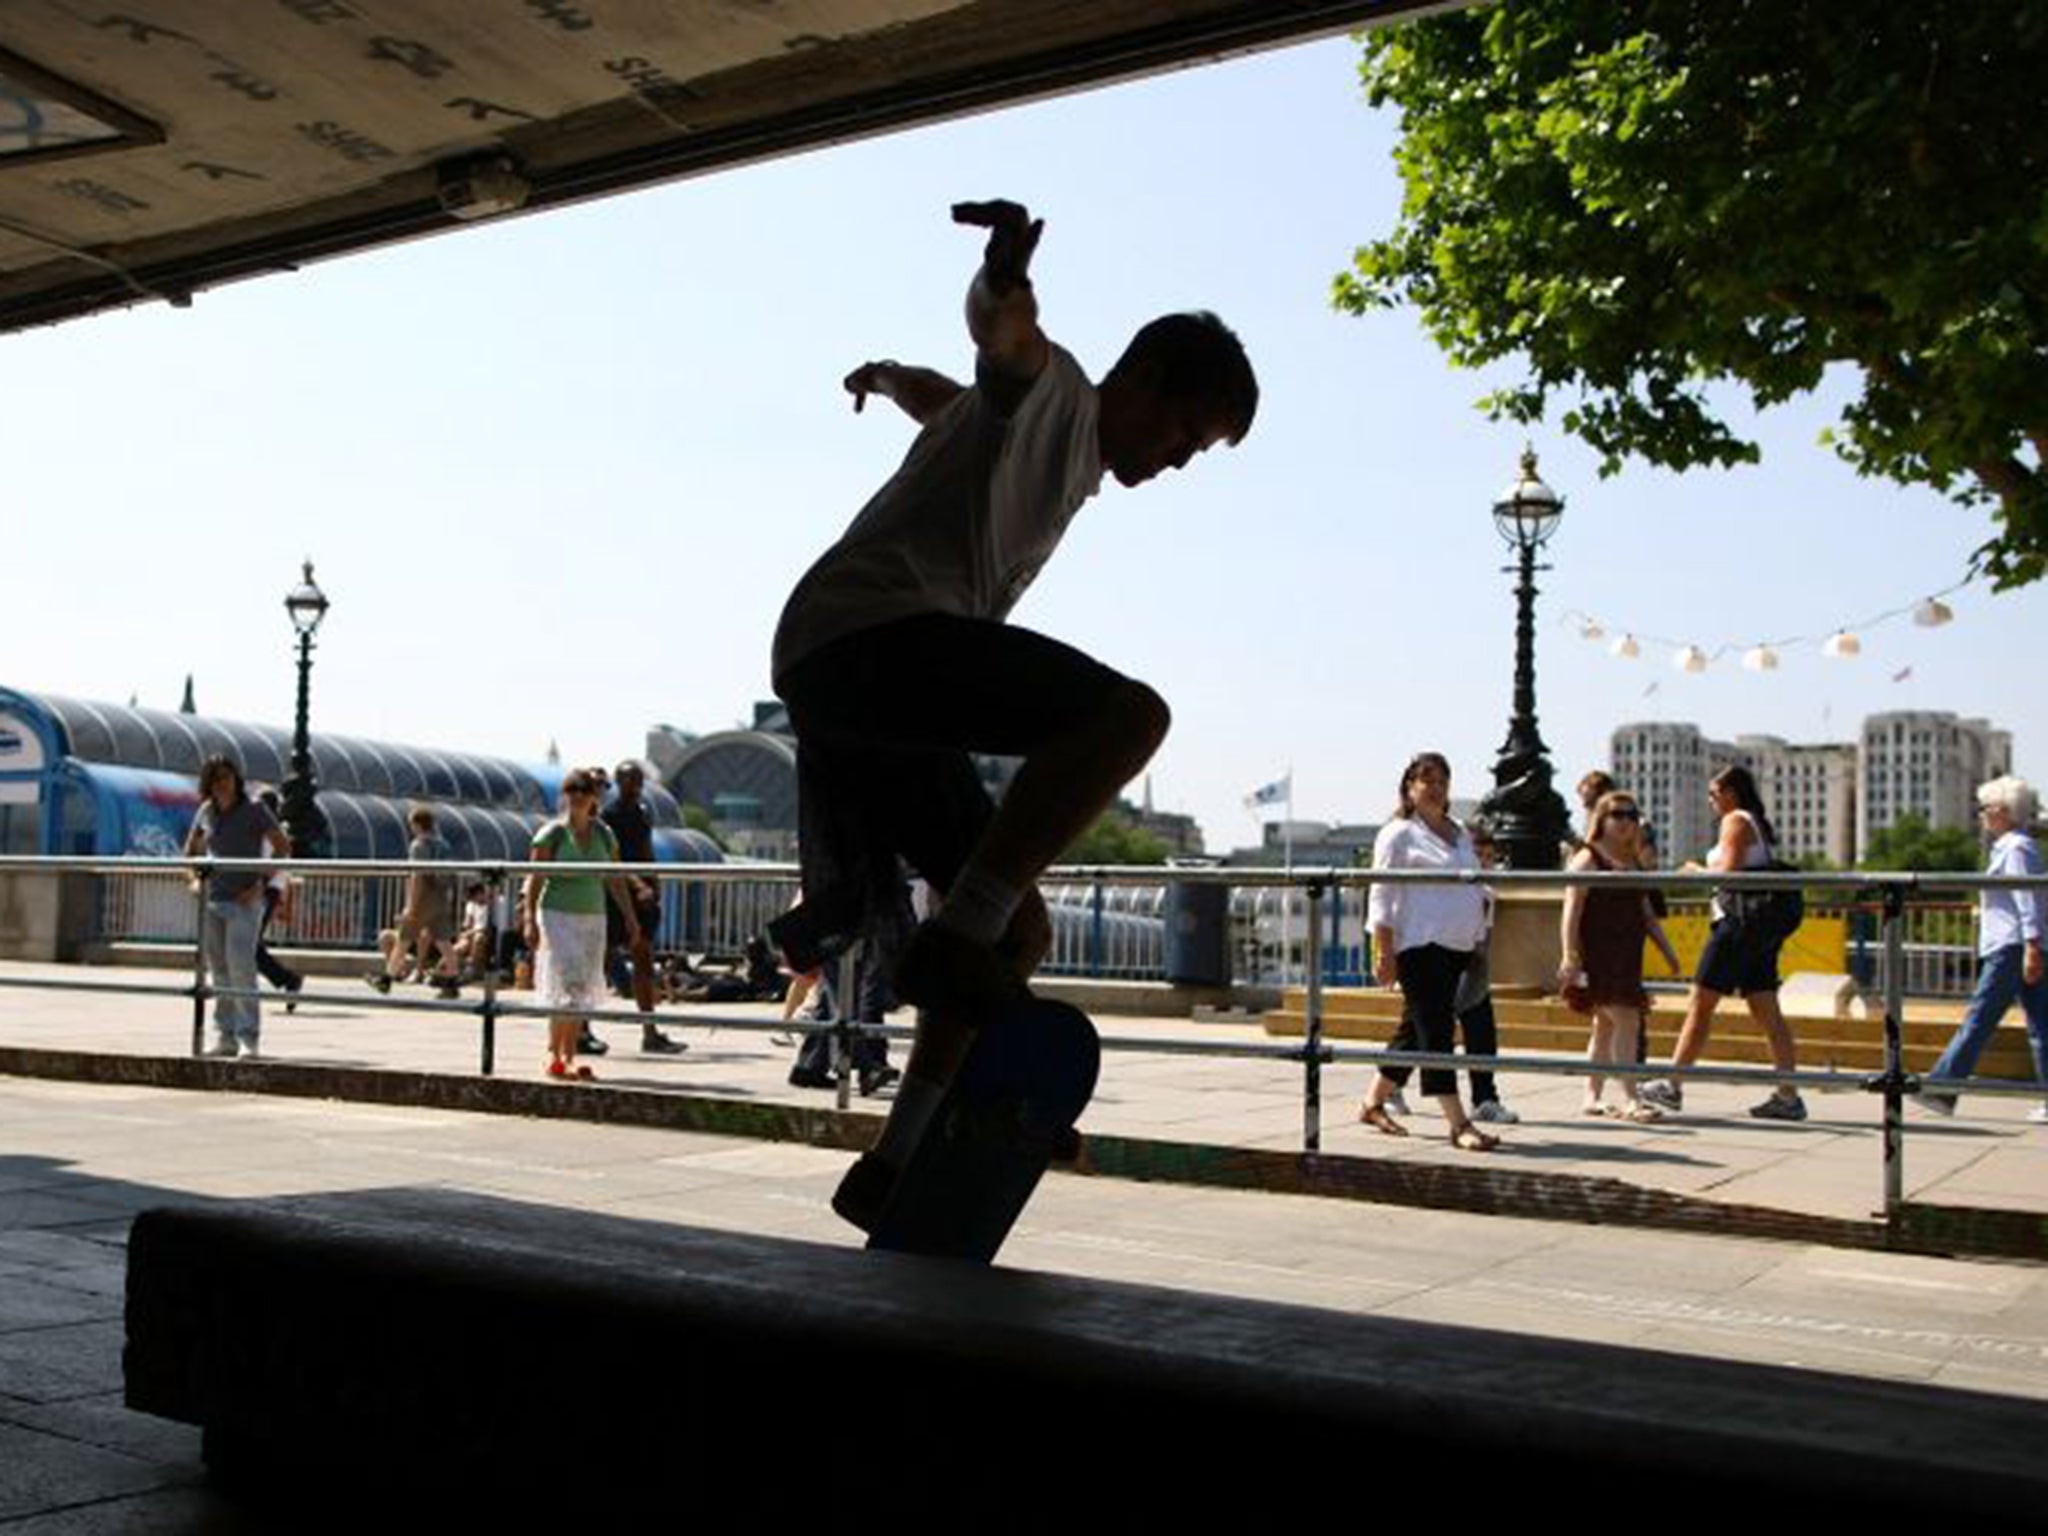 enkel en alleen theater nerveus worden Street skaters may find their latest moves land them in court – but they  are fighting back | The Independent | The Independent